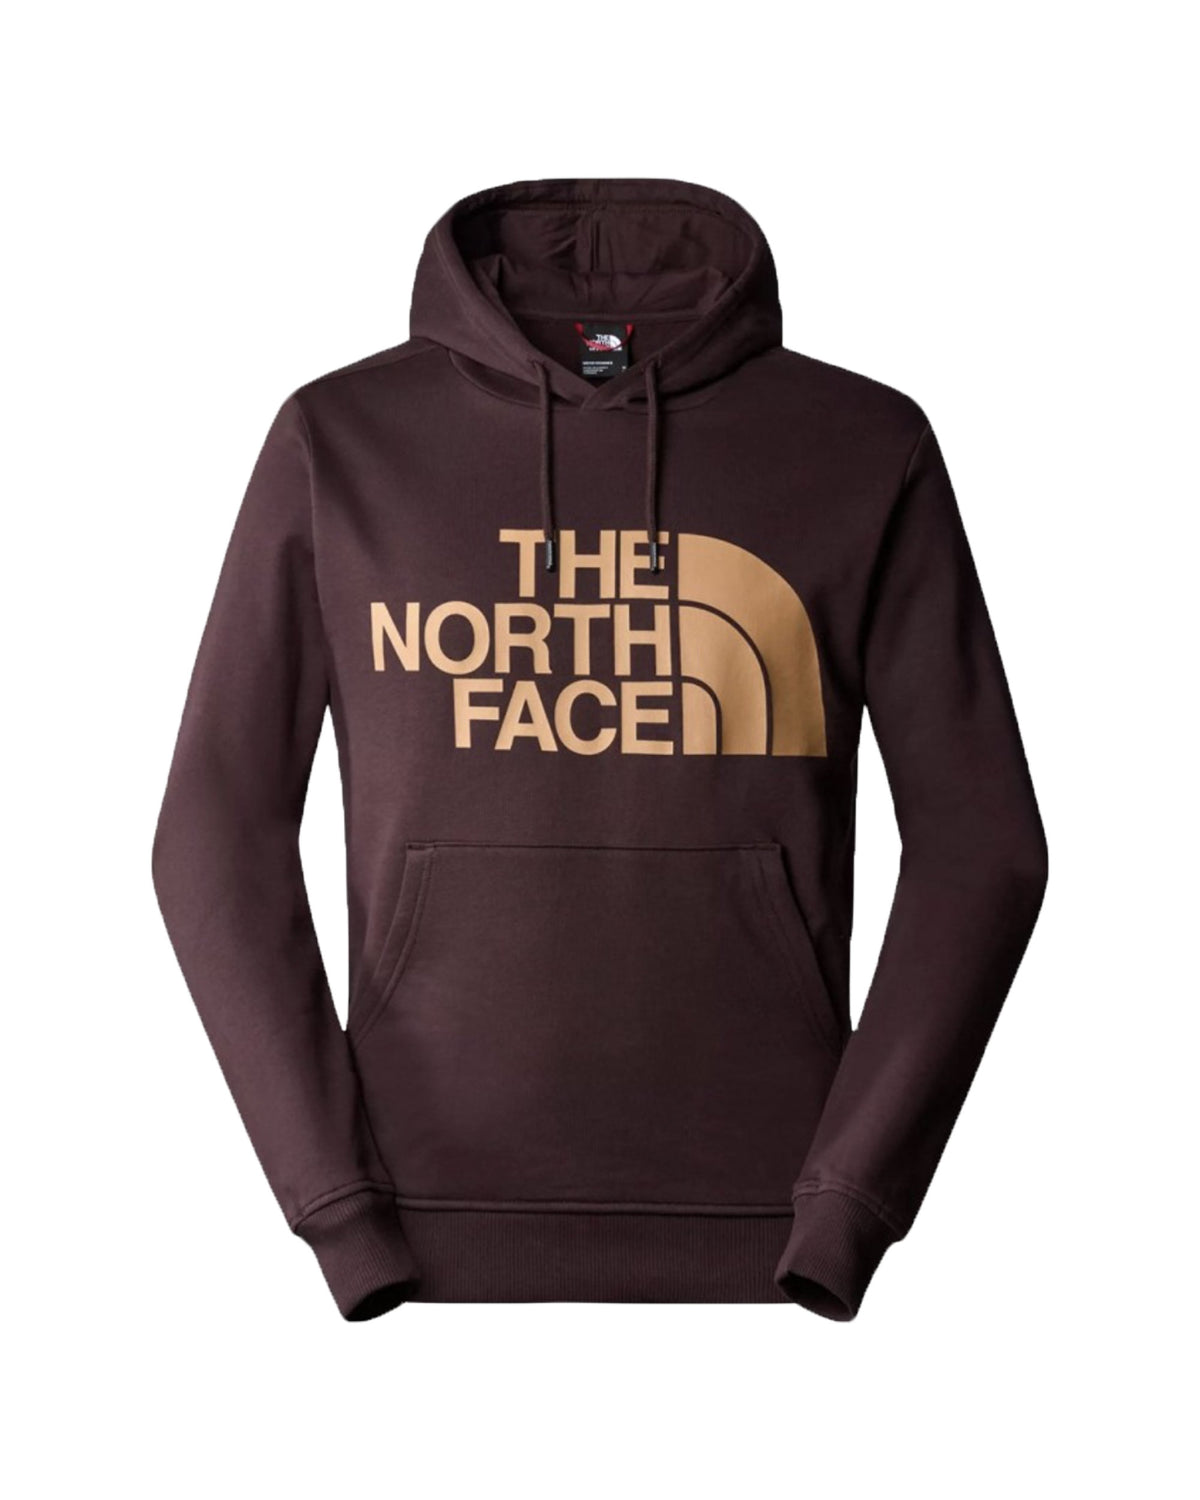 The North Face Standard Hoodie Coal Brown